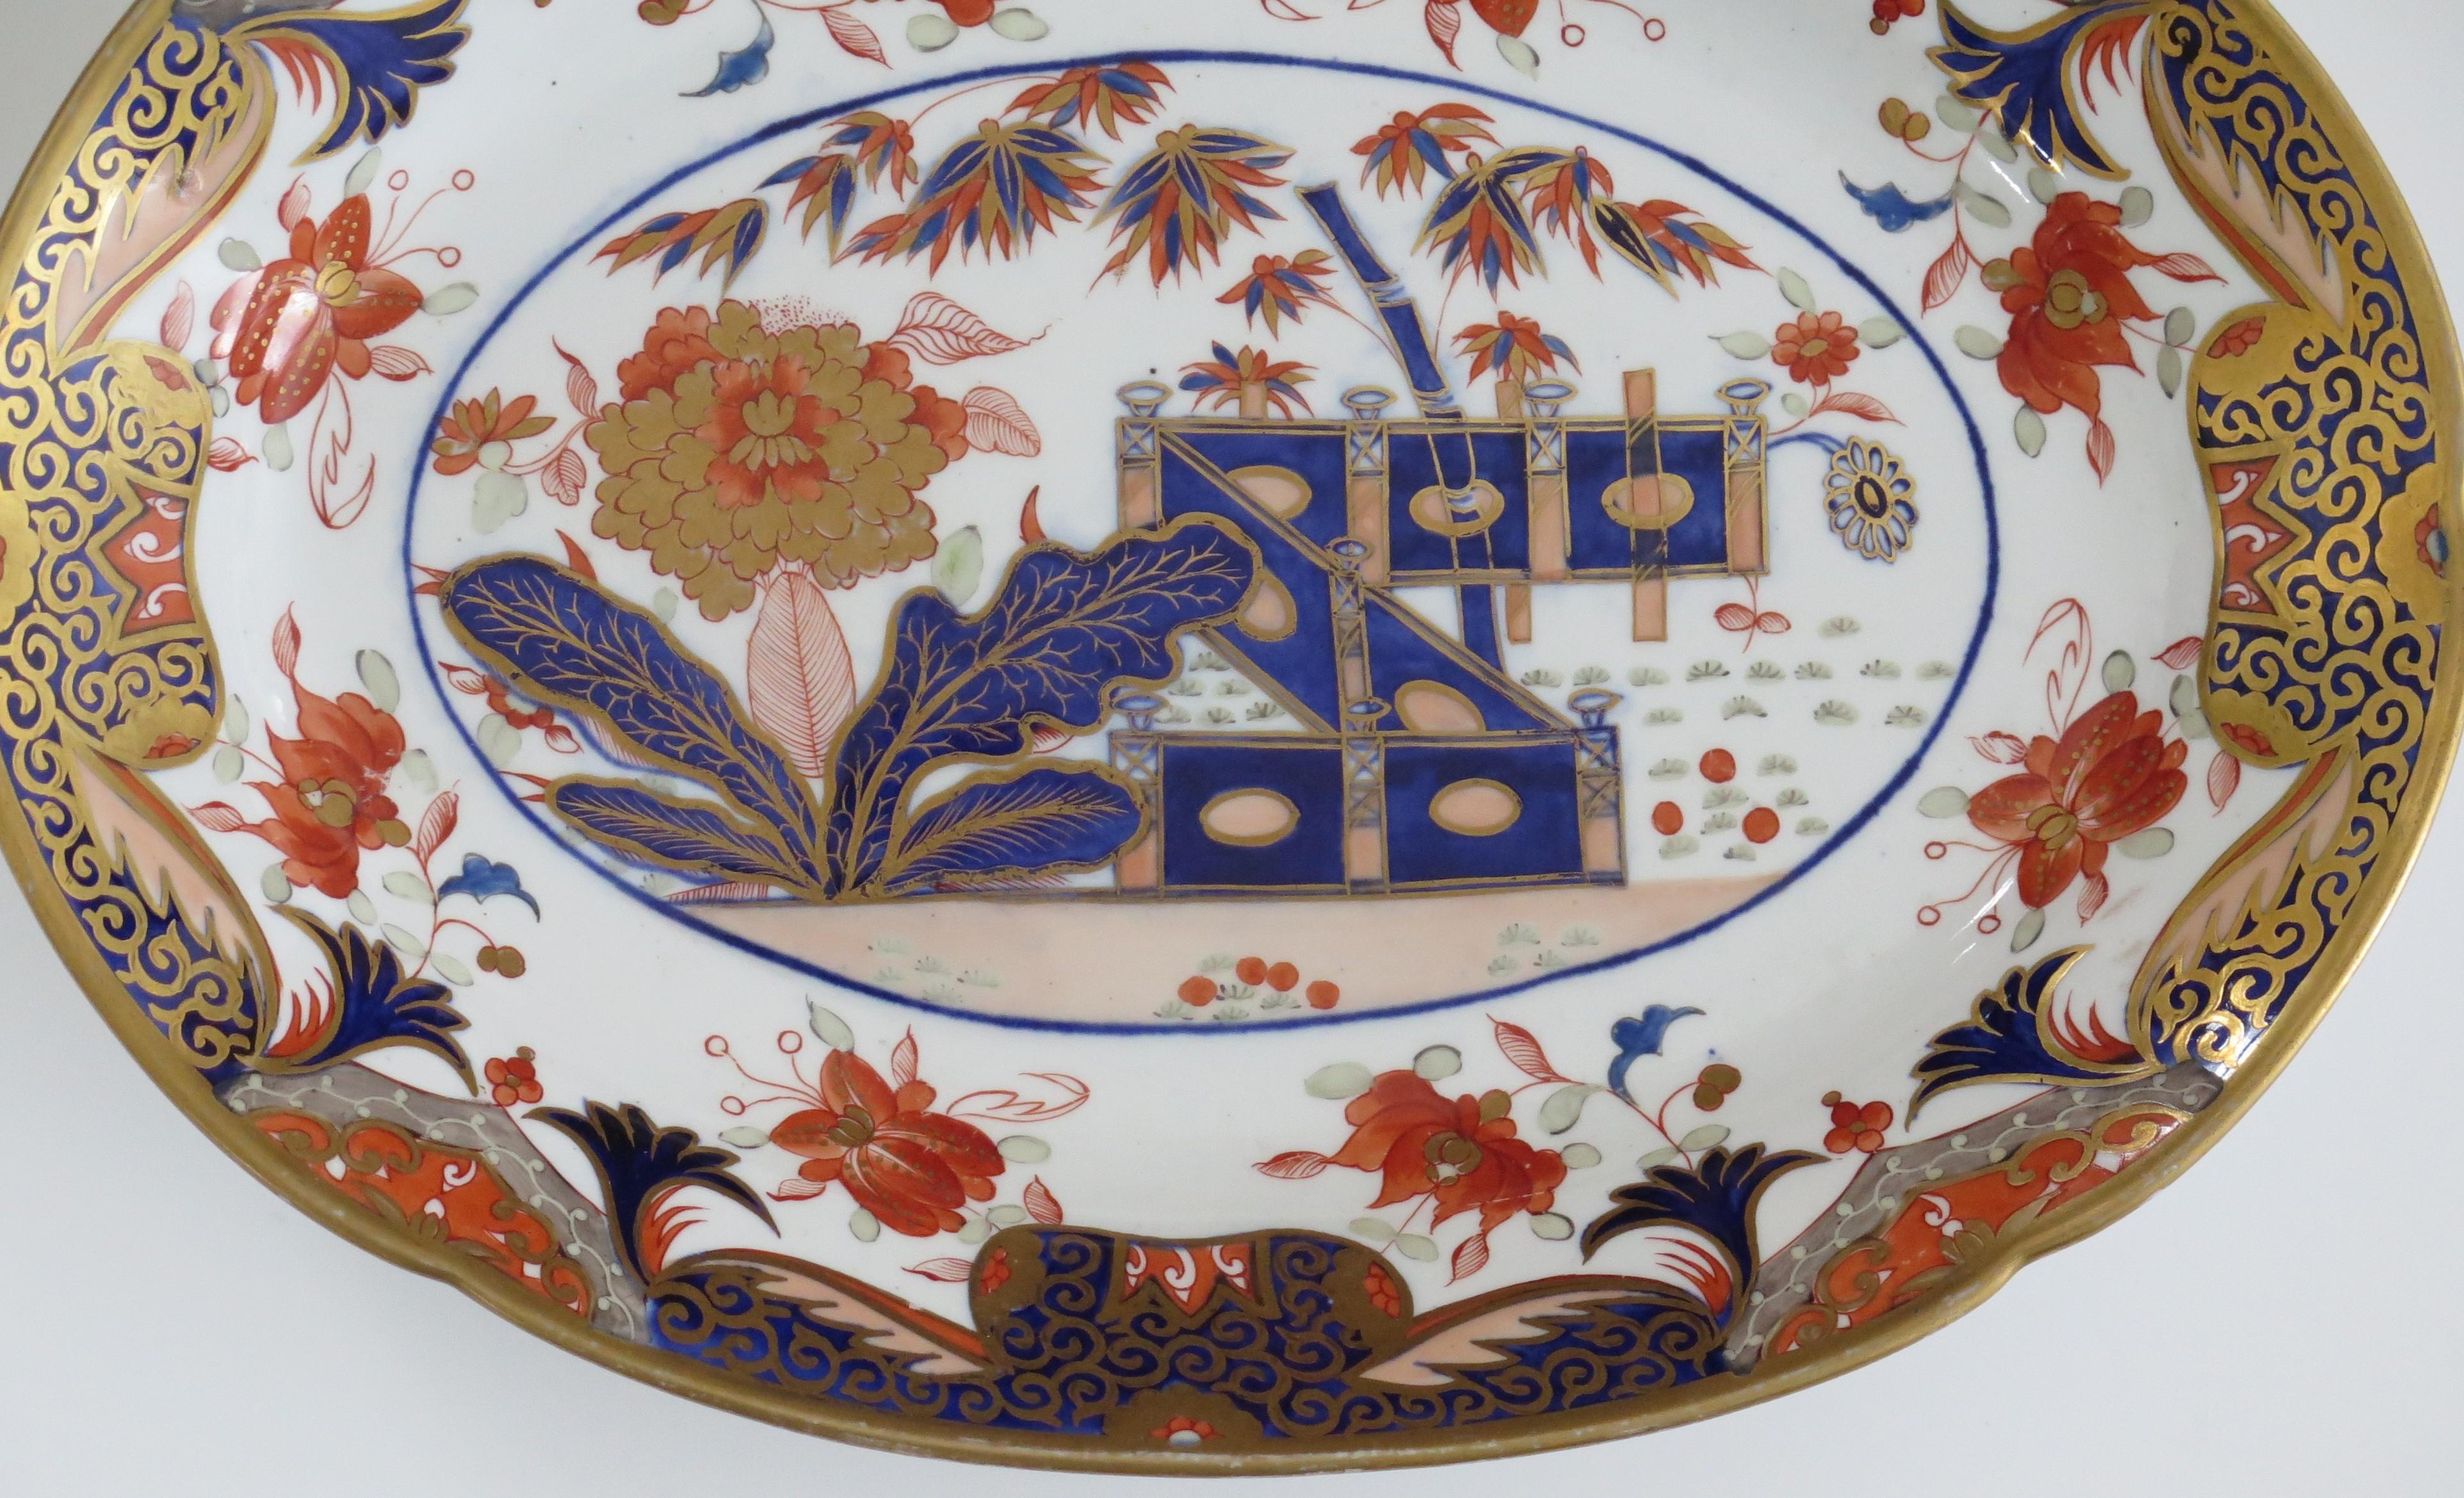 19th Century Spode Porcelain Serving Platter or Dish Hand Painted & Gilded Ptn 967 circa 1810 For Sale